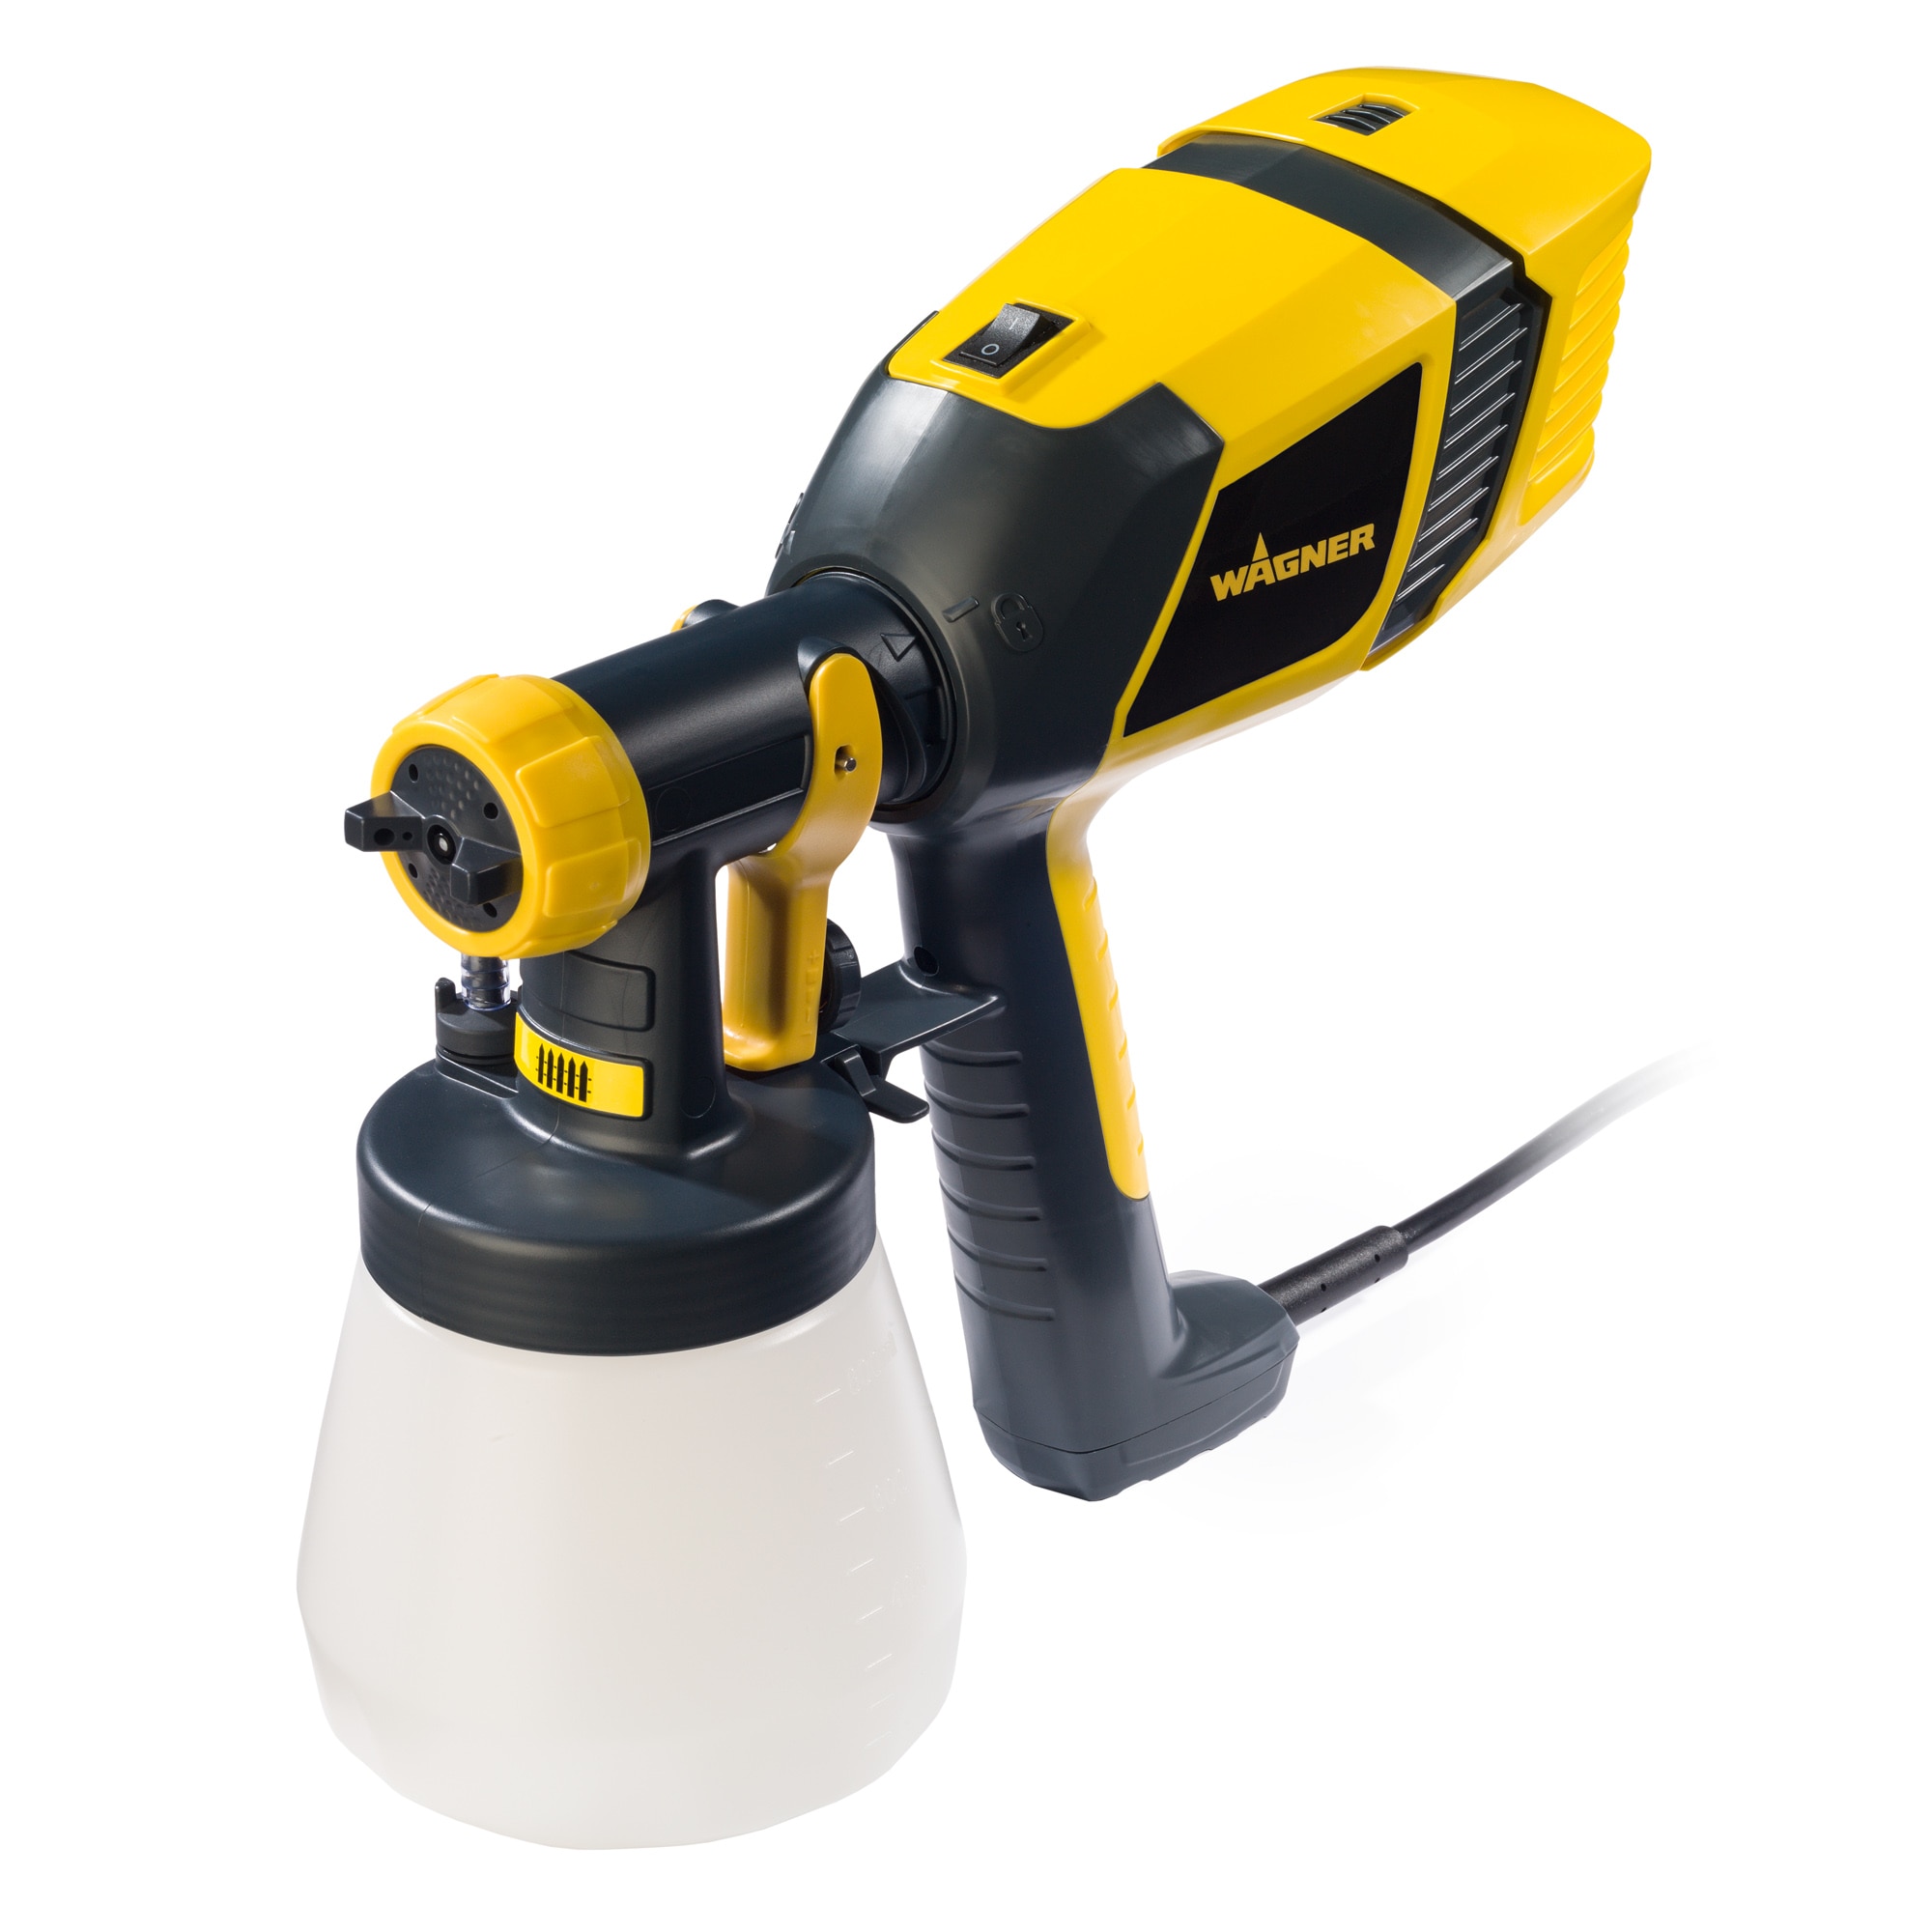 Wagner Control Spray 250 Corded Electric Handheld HVLP Paint